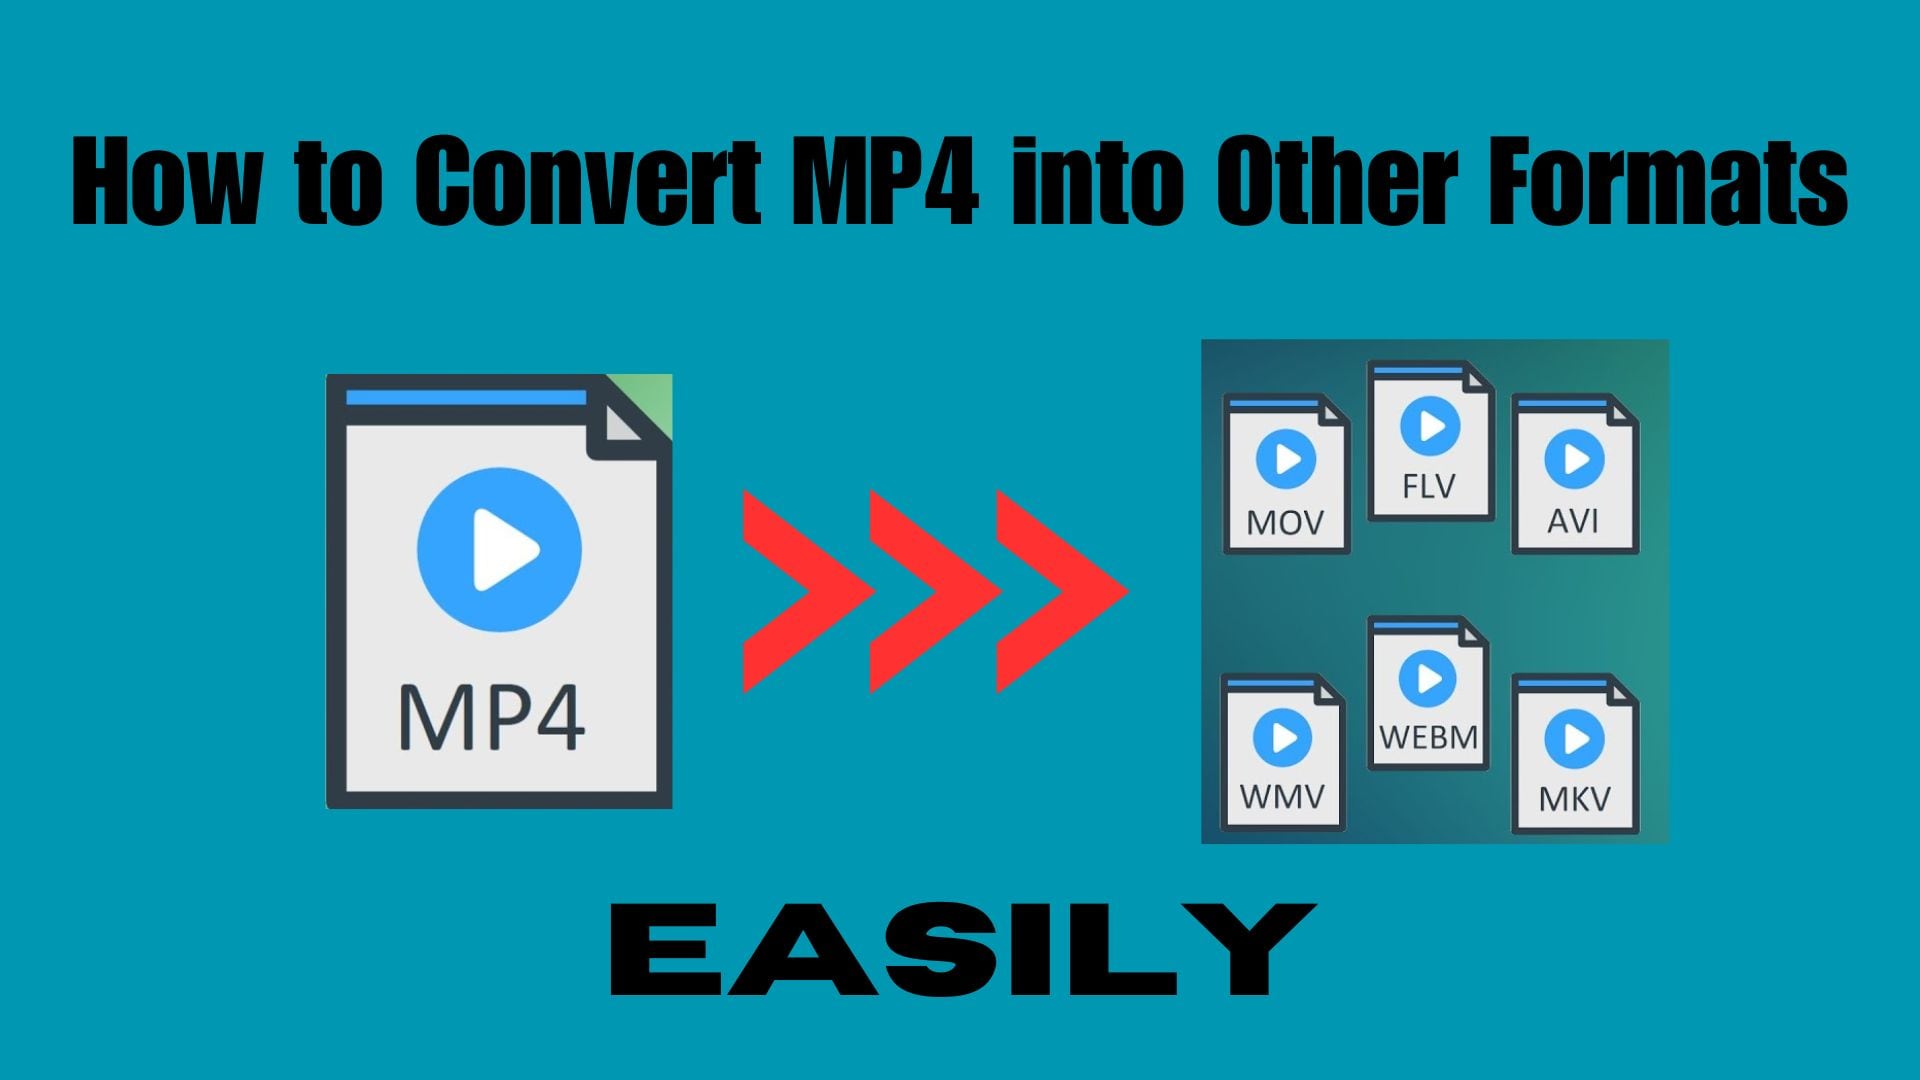 How to Convert MP4 into Other Formats Easily